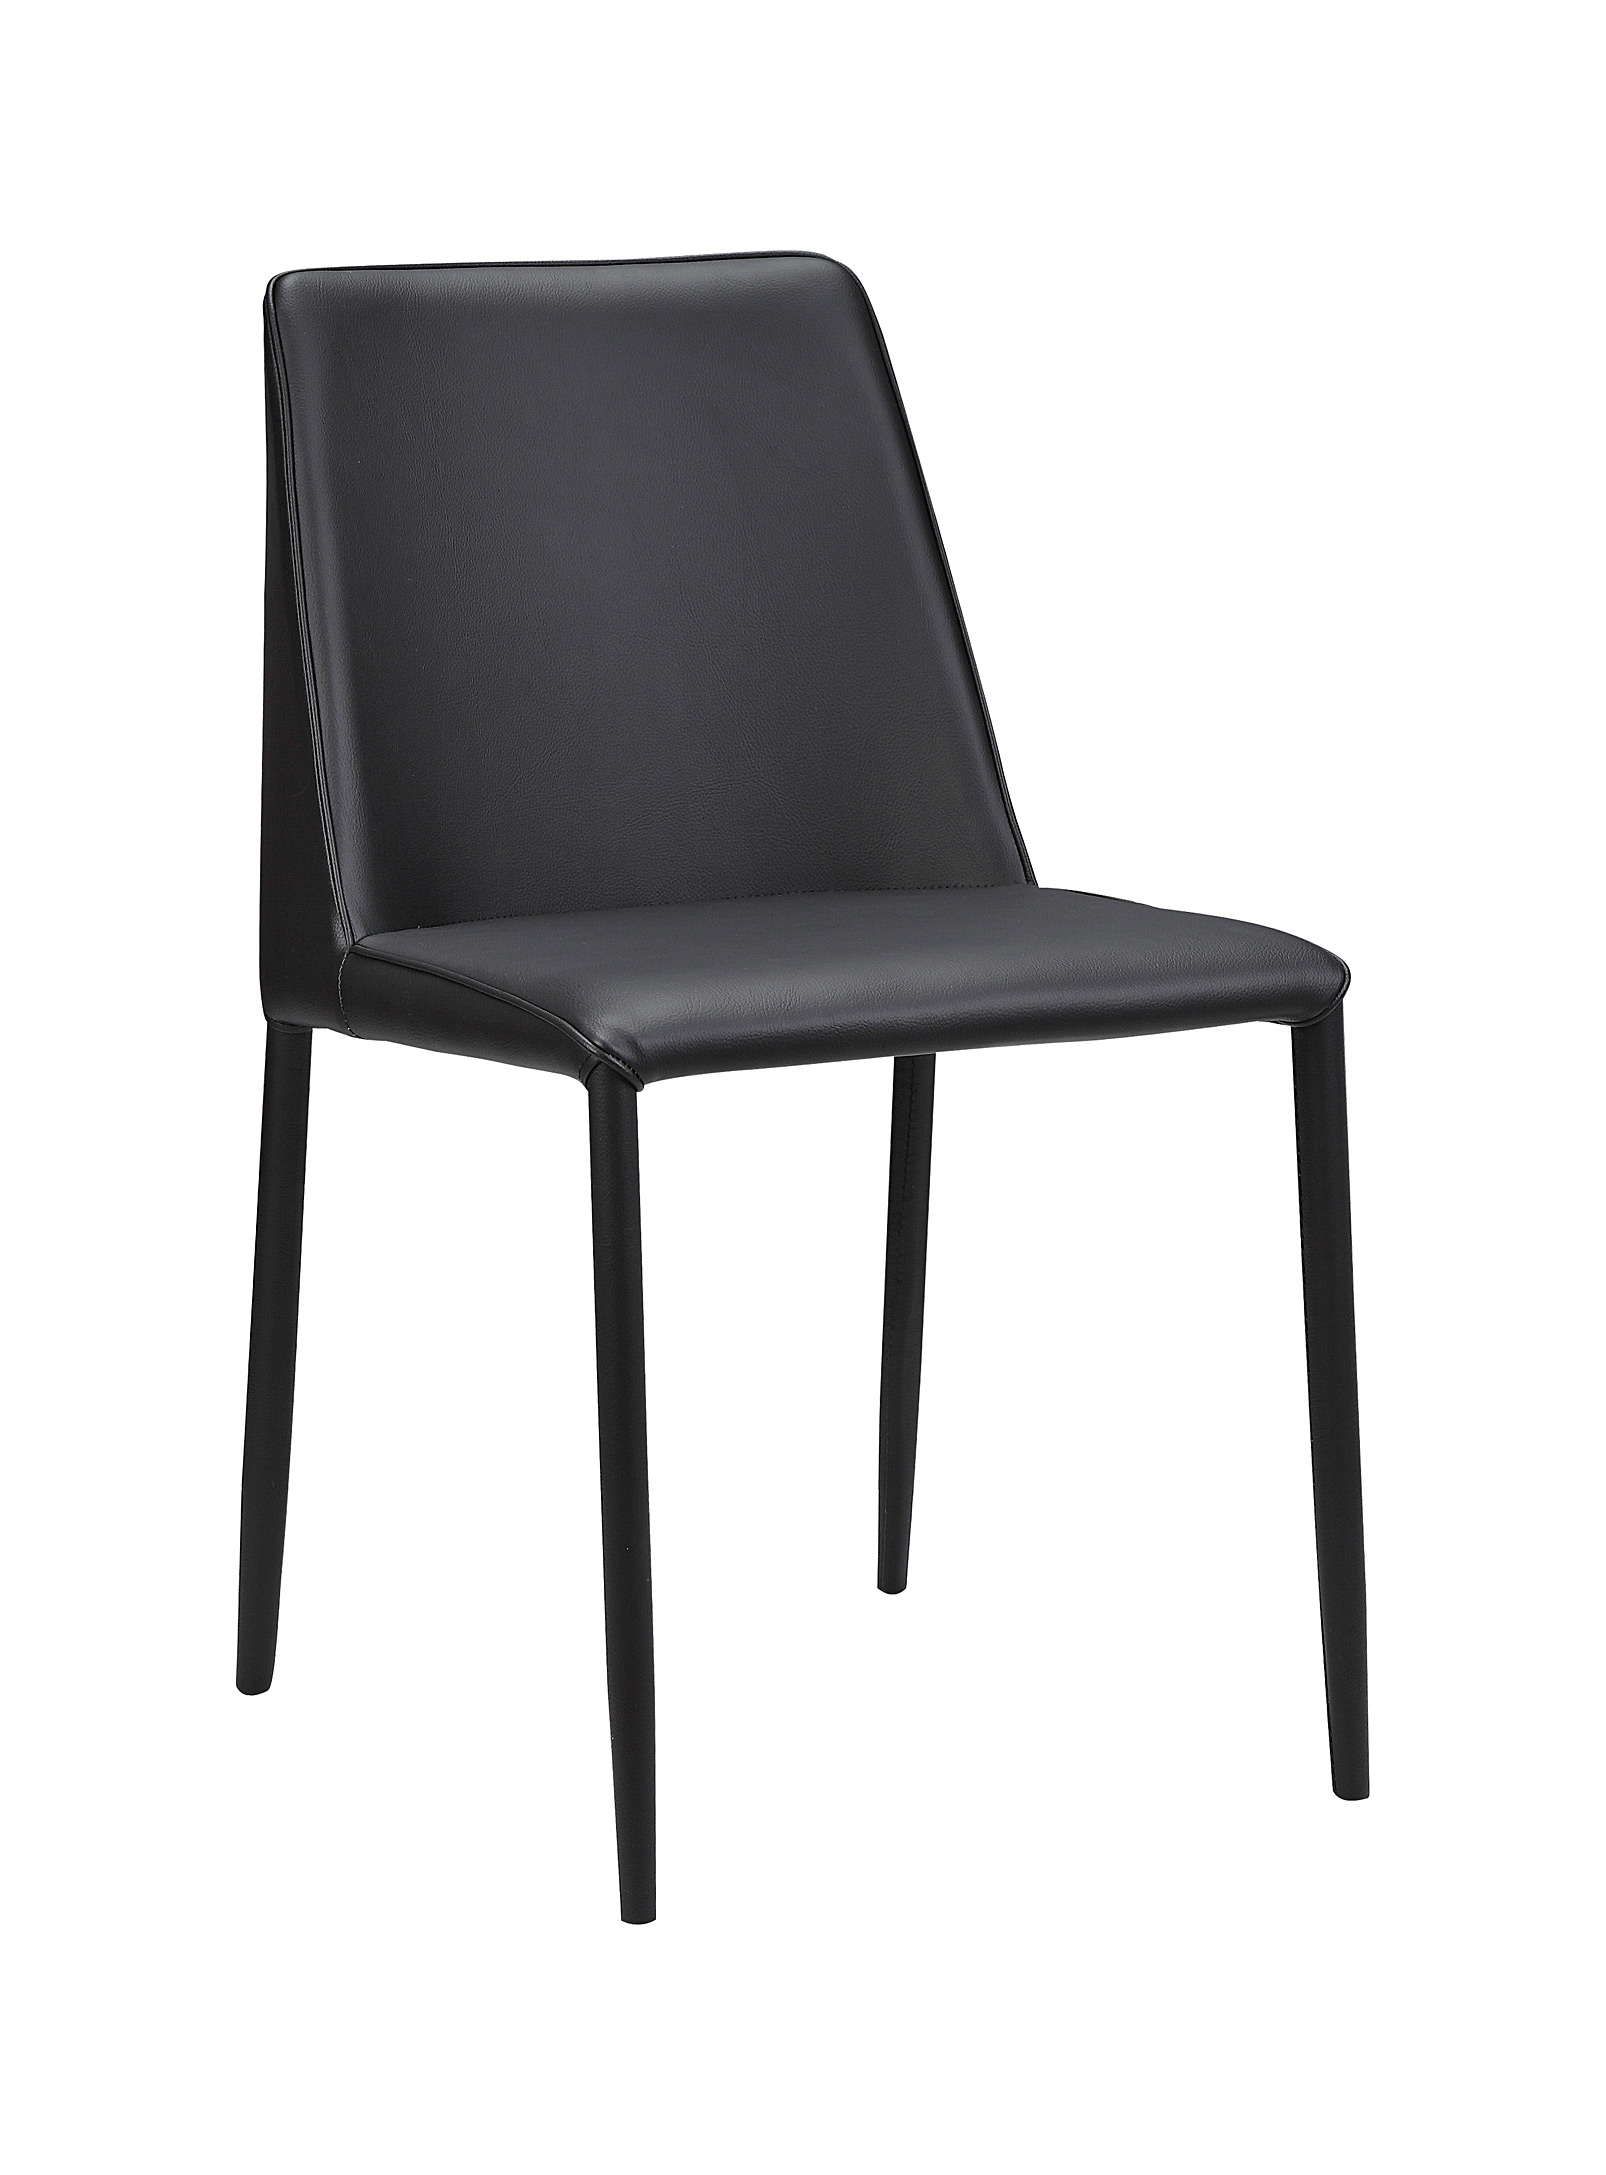 Moe's Home Collection - Nora vegan leather black kitchen chairs Set of 2